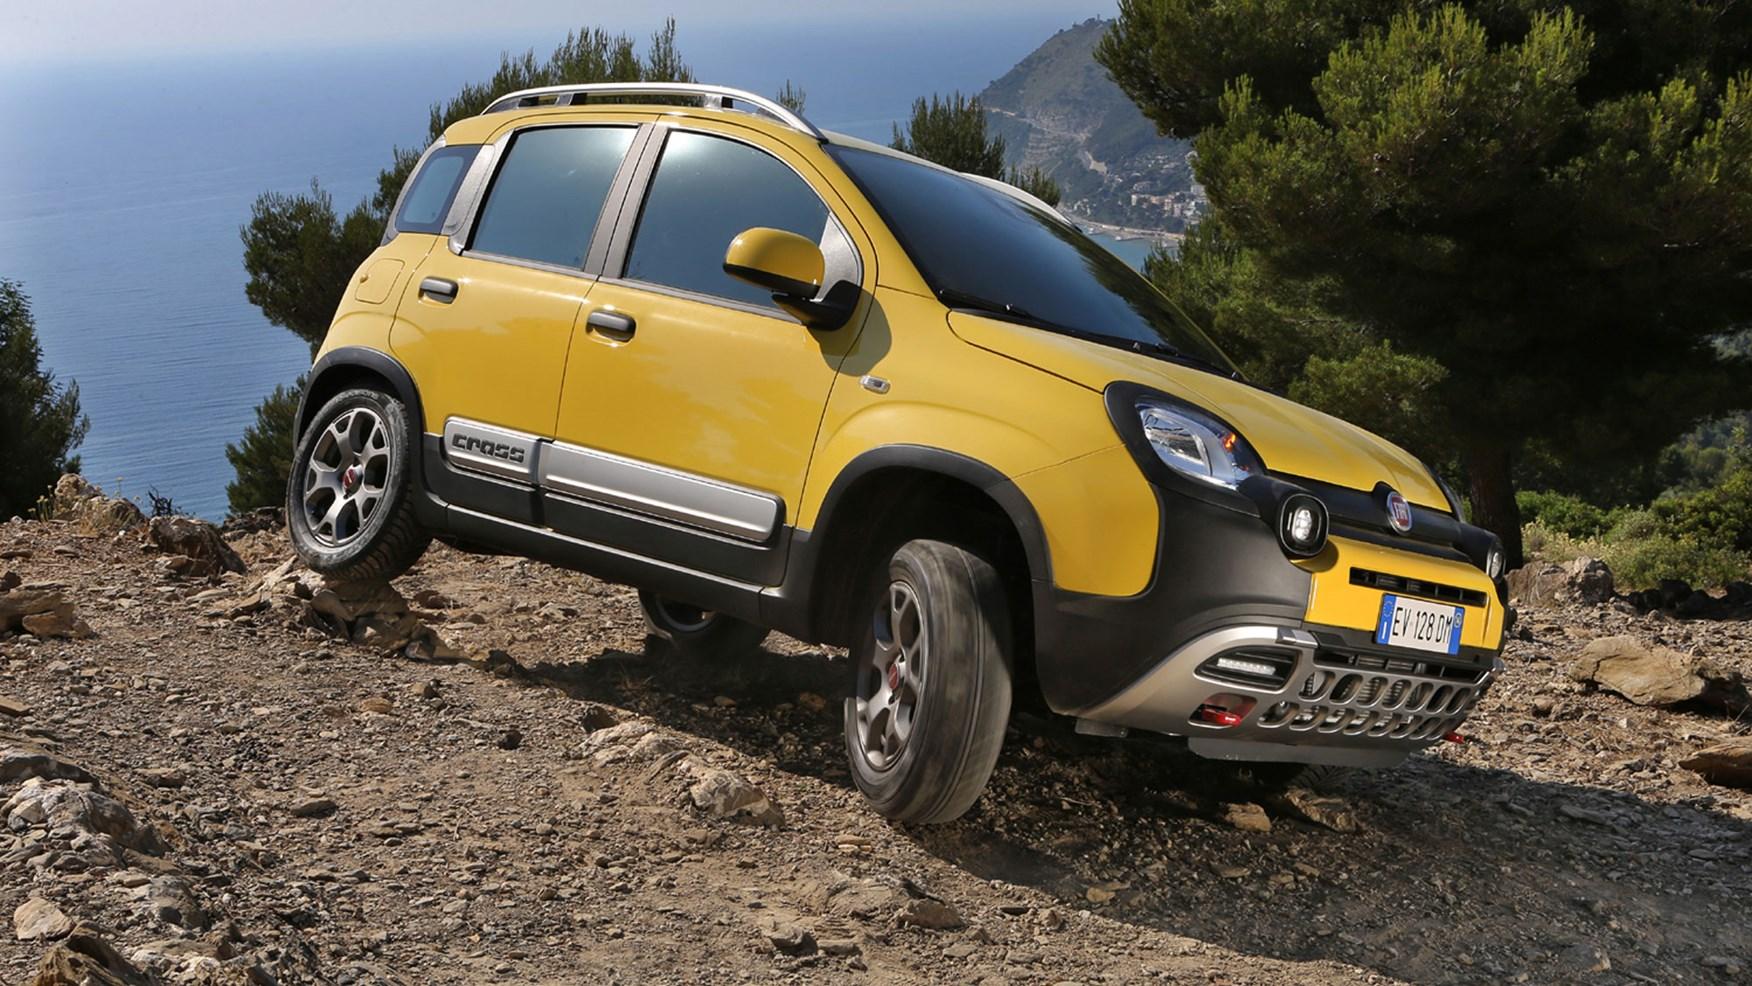 Top 5 Fiat Panda 4x4 accessories to make your babySUV